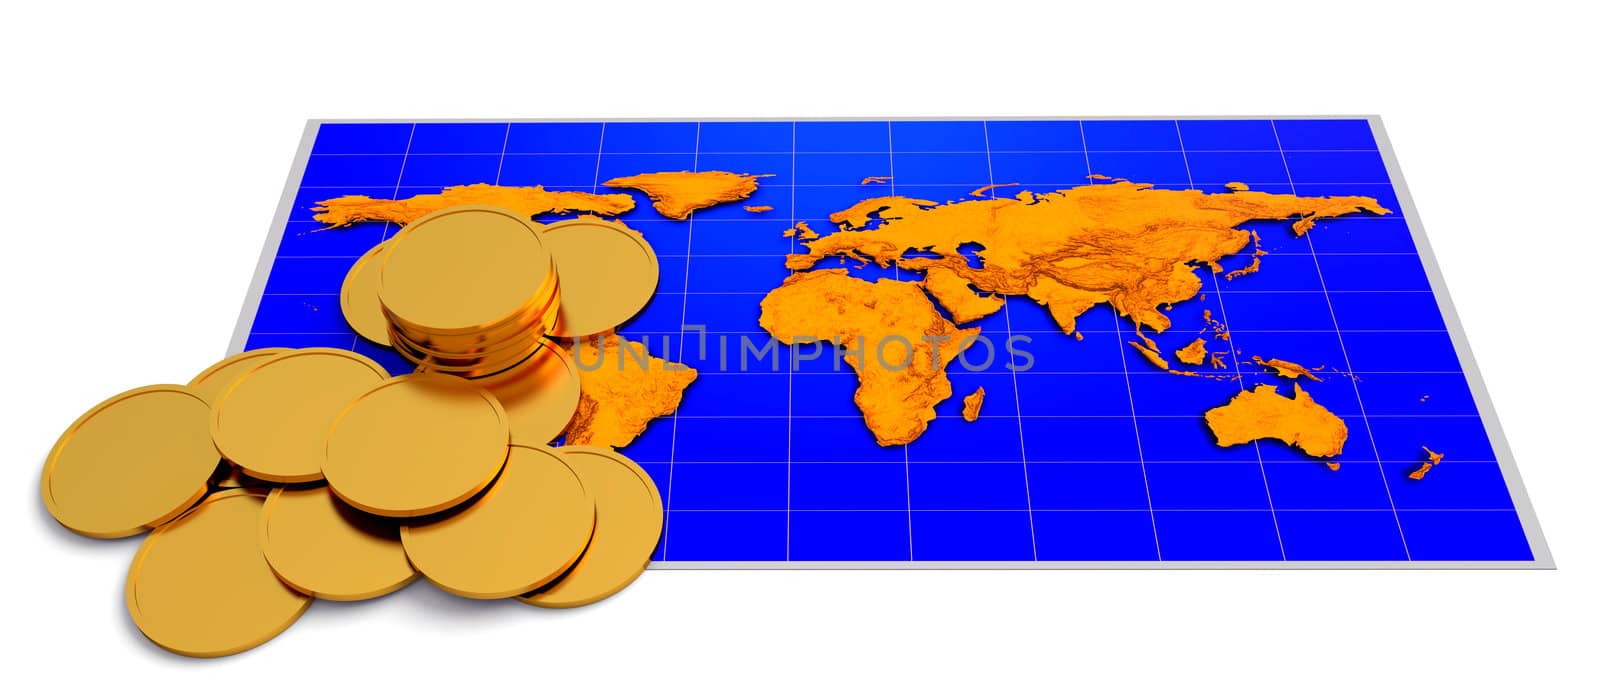 Coins over world map on the white background